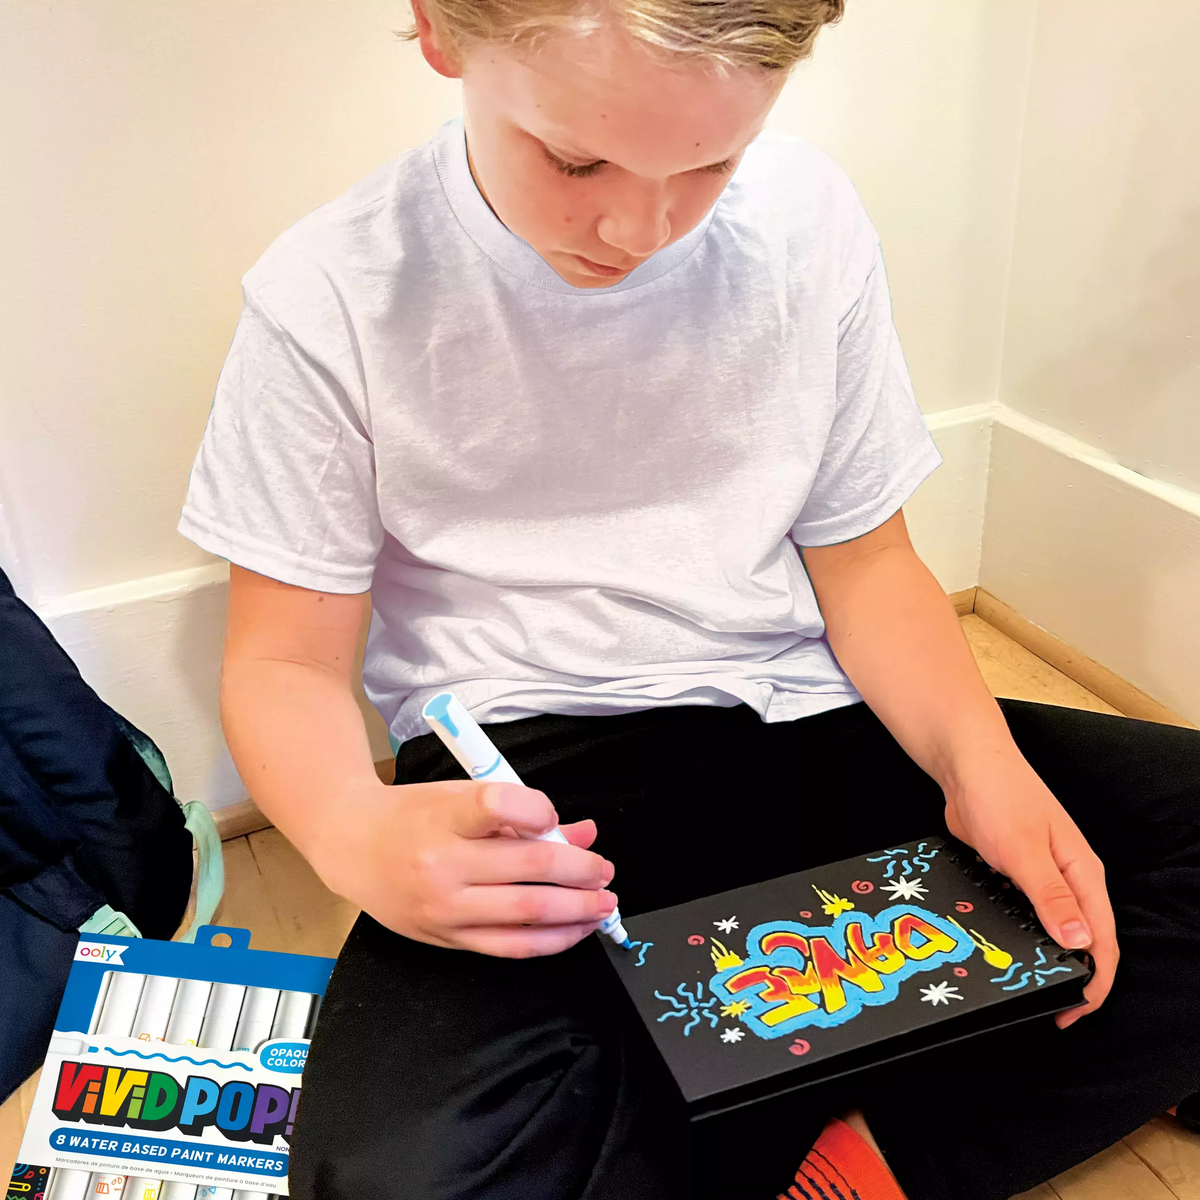 Boy painting with Vivid Pop! Water Based paint markers on black paper